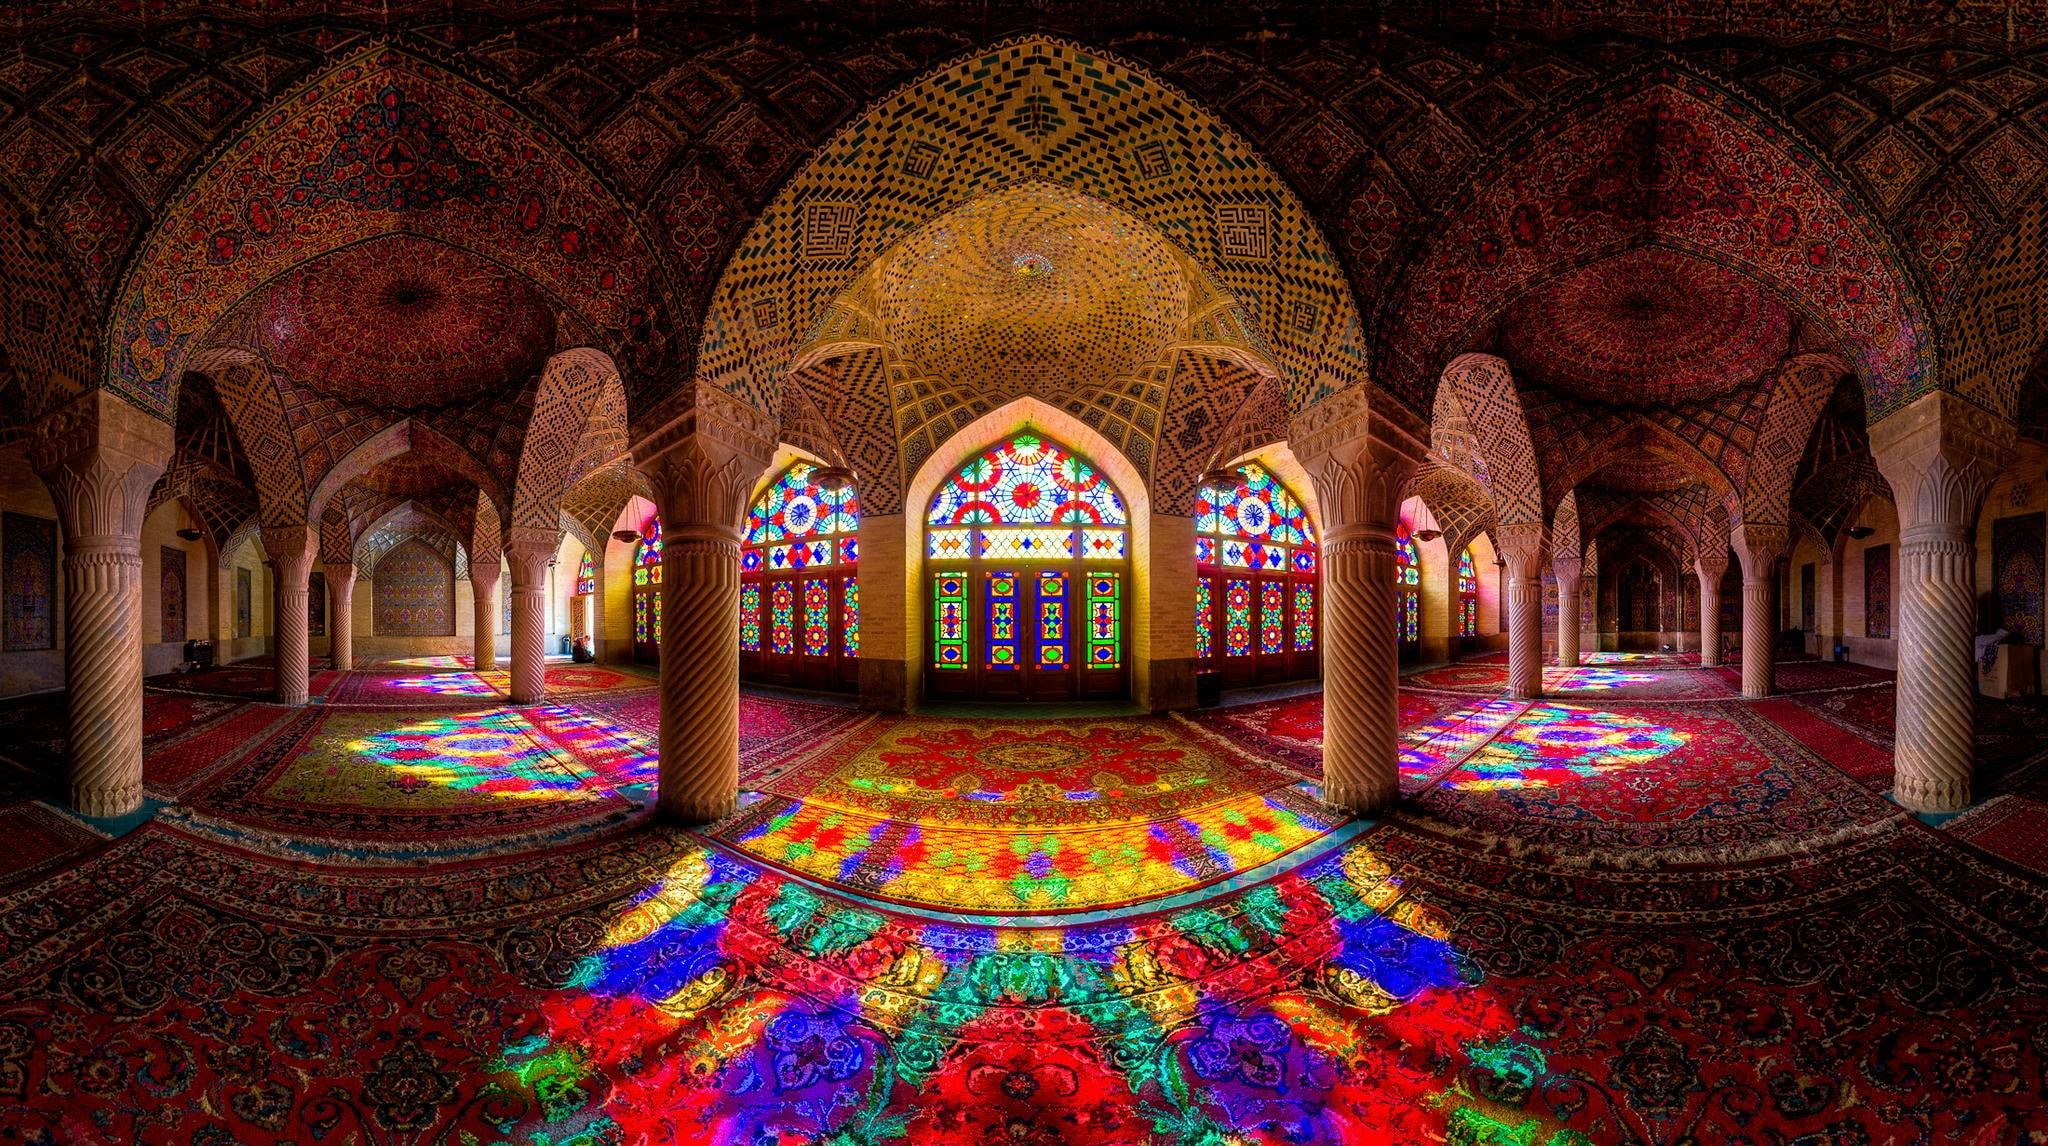 stained glass, reflection, Iran, mosque, colorful, Nasir al-Mulk Mosque